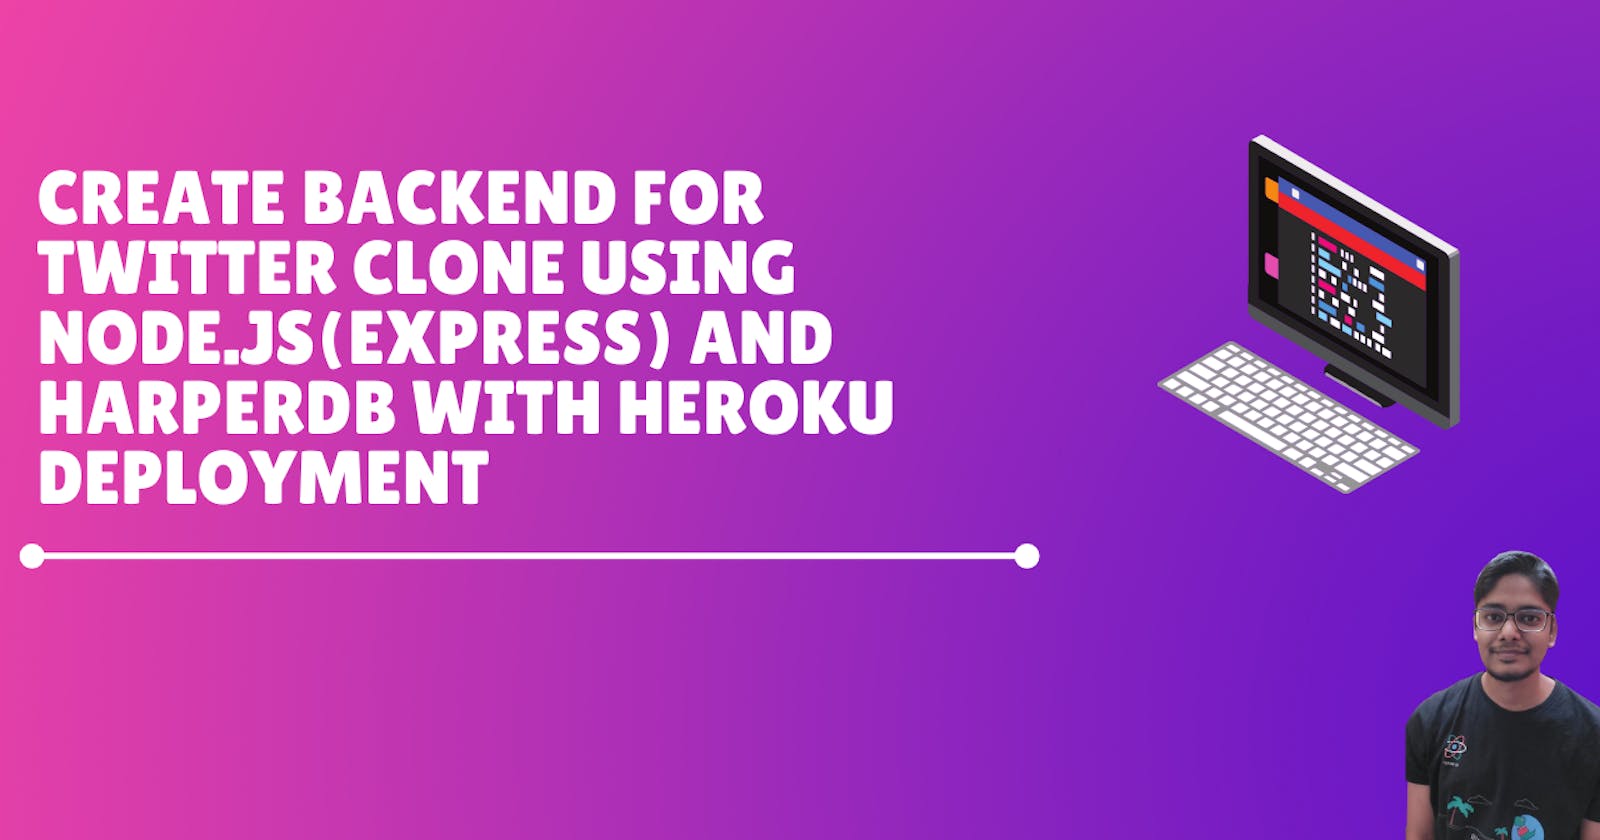 Create backend for Twitter clone using Node.js (express.js) and HarperDB with Heroku deployment